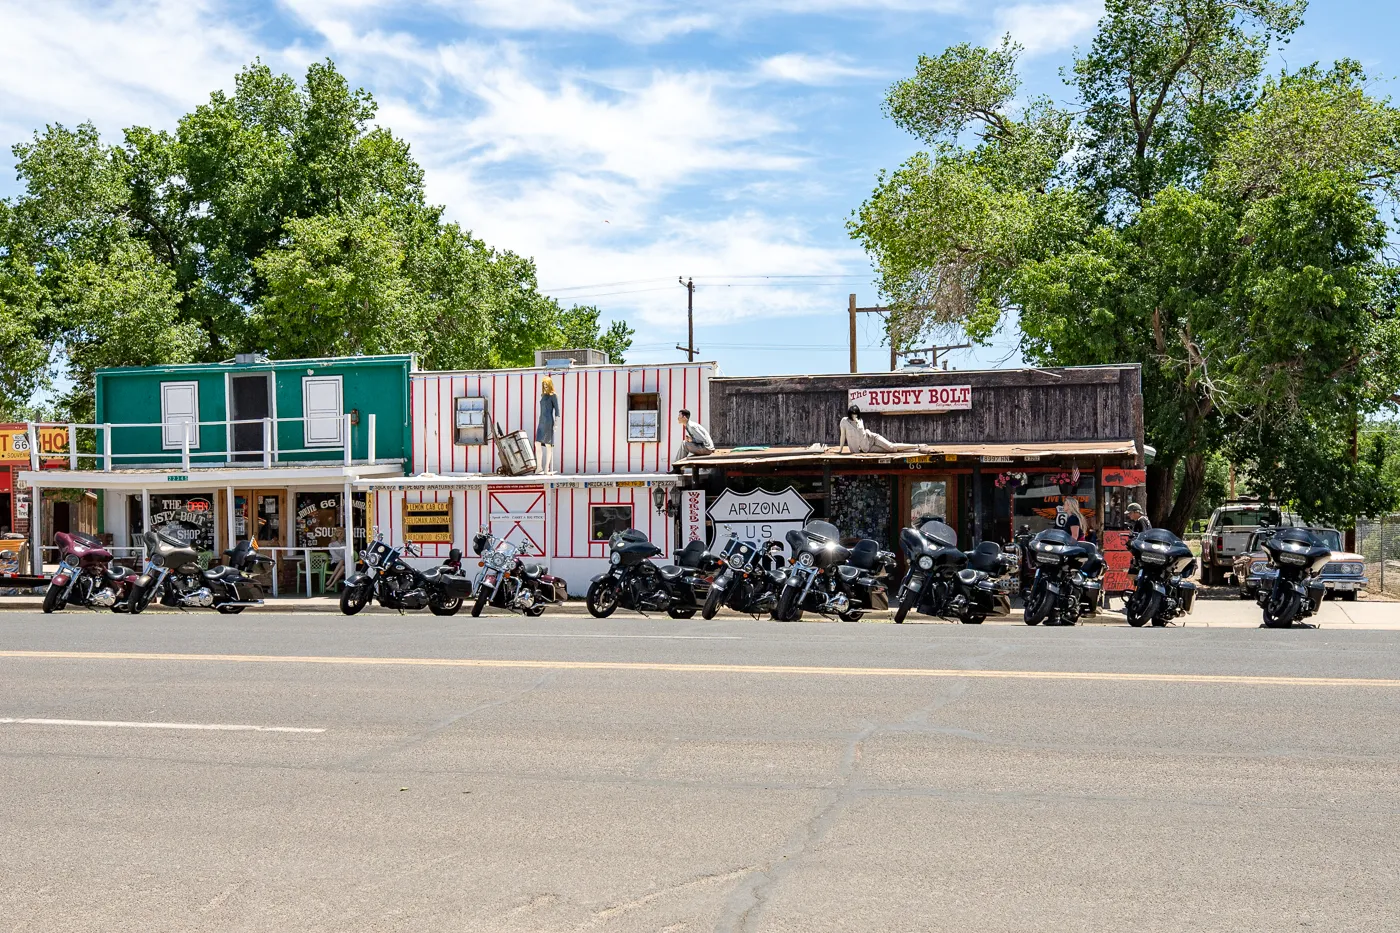 The Rusty Bolt in Seligman, Arizona Route 66 Roadside Attraction and Gift Shop